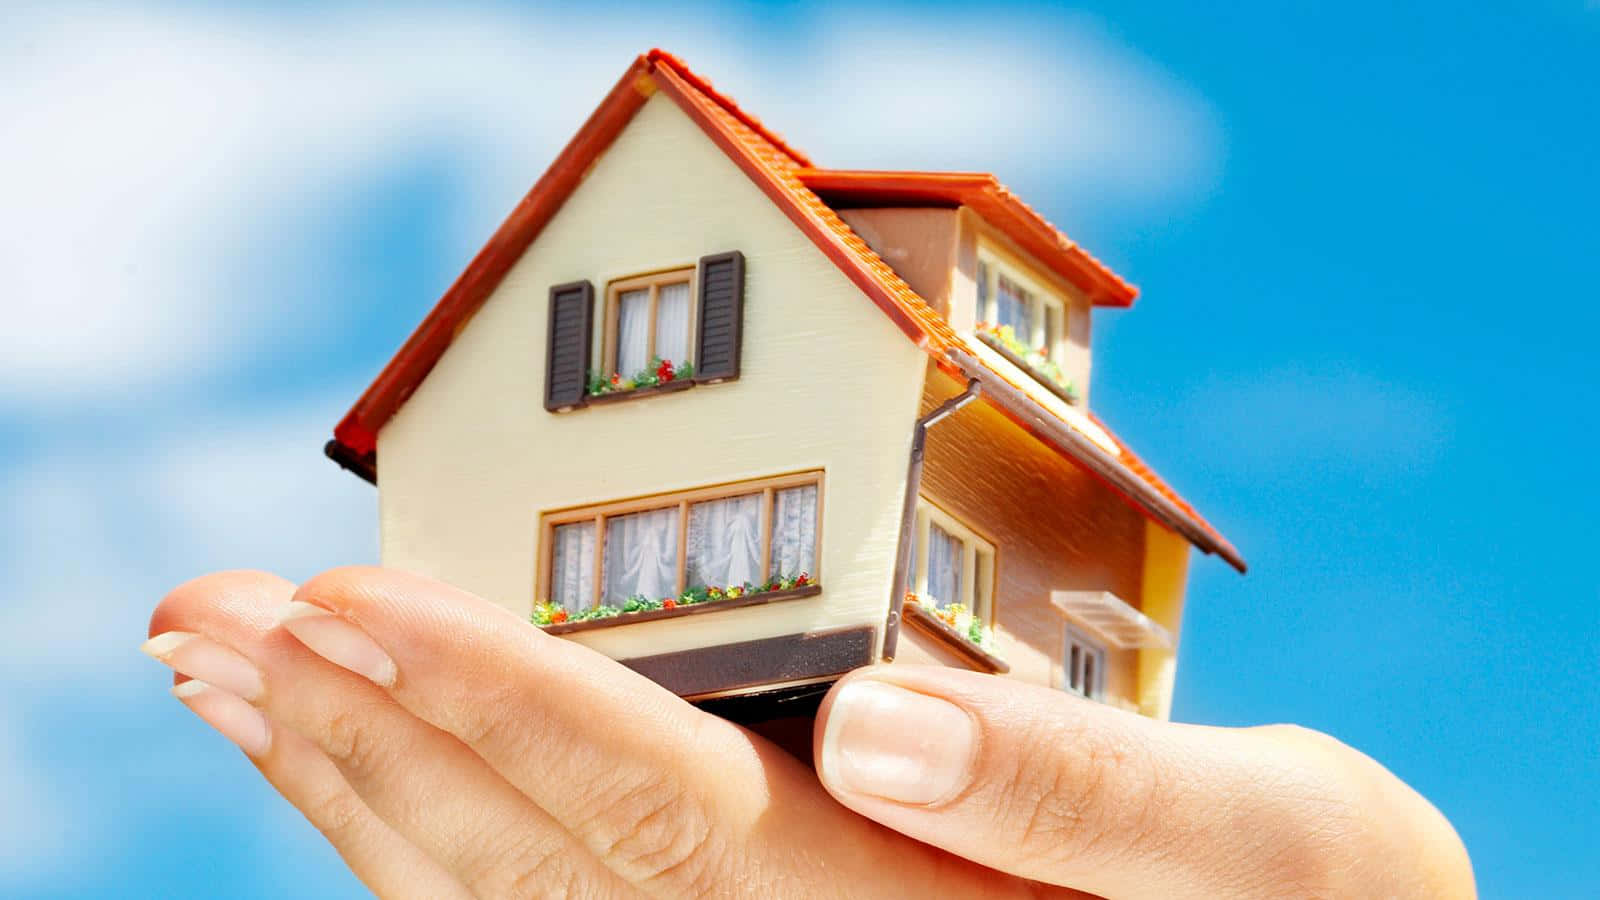 A Person Holding A Model House In Their Hand